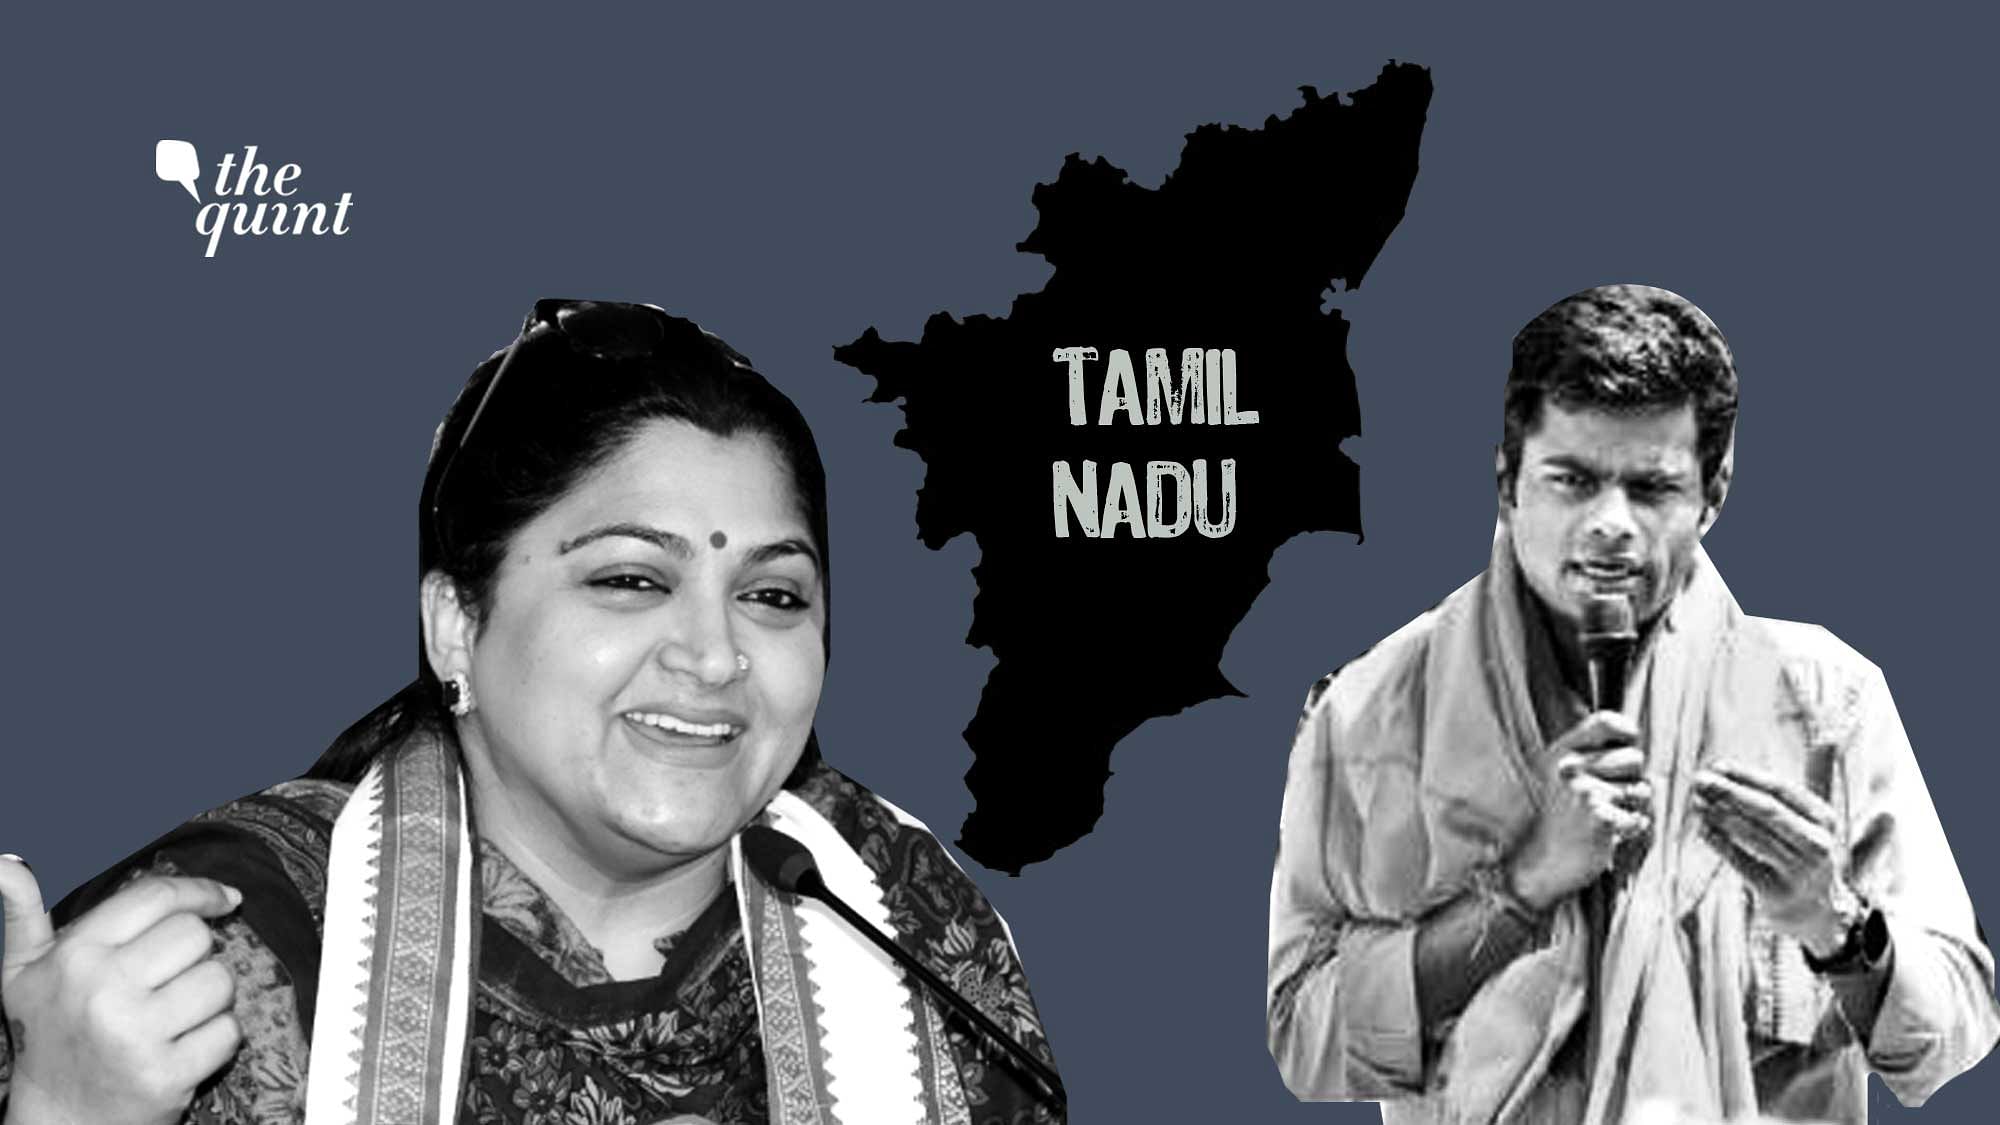 Image of Tamil actor-politician Kushboo Sundar (L) and cop-turned-politician K Annamalai (R) used for representational purposes.